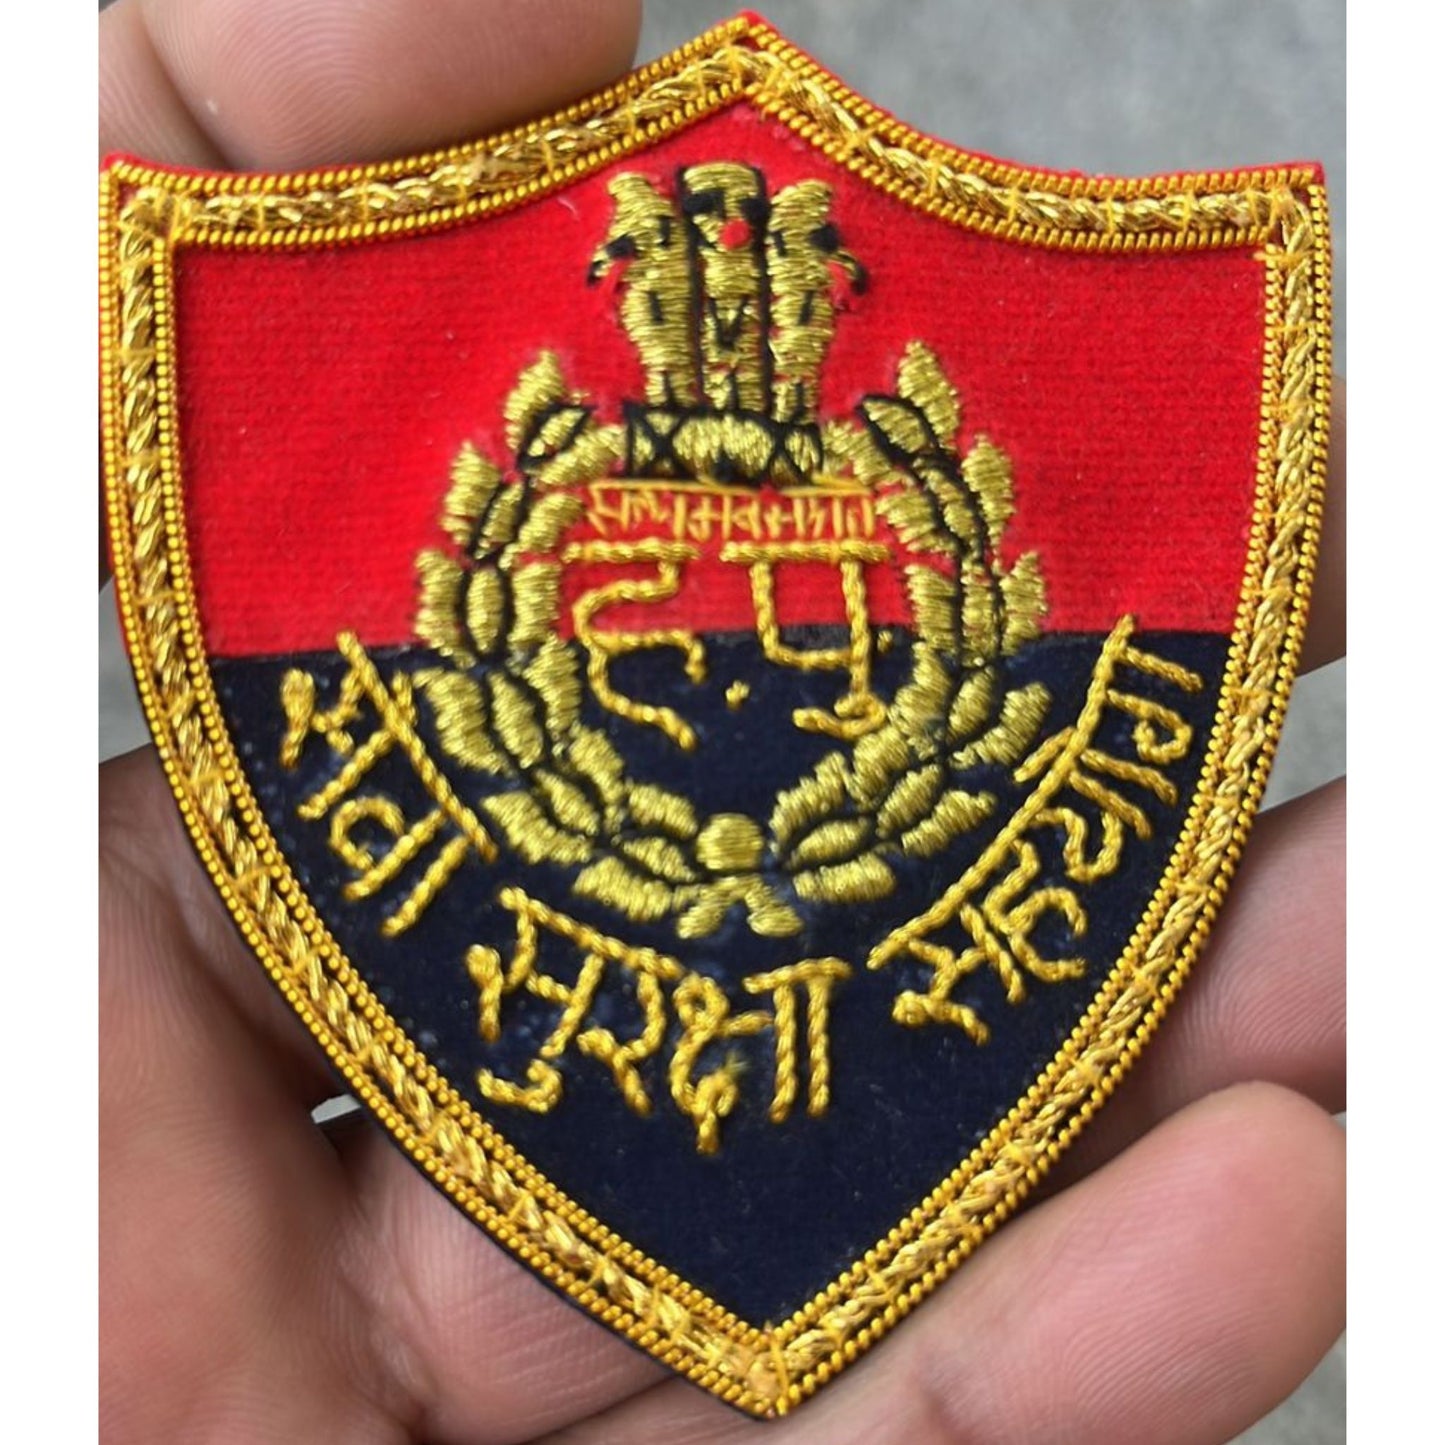 FORMATION SIGN/INSIGNIA -HARYANA POLICE/HOME GUARDS/CIVIL DEFENCE